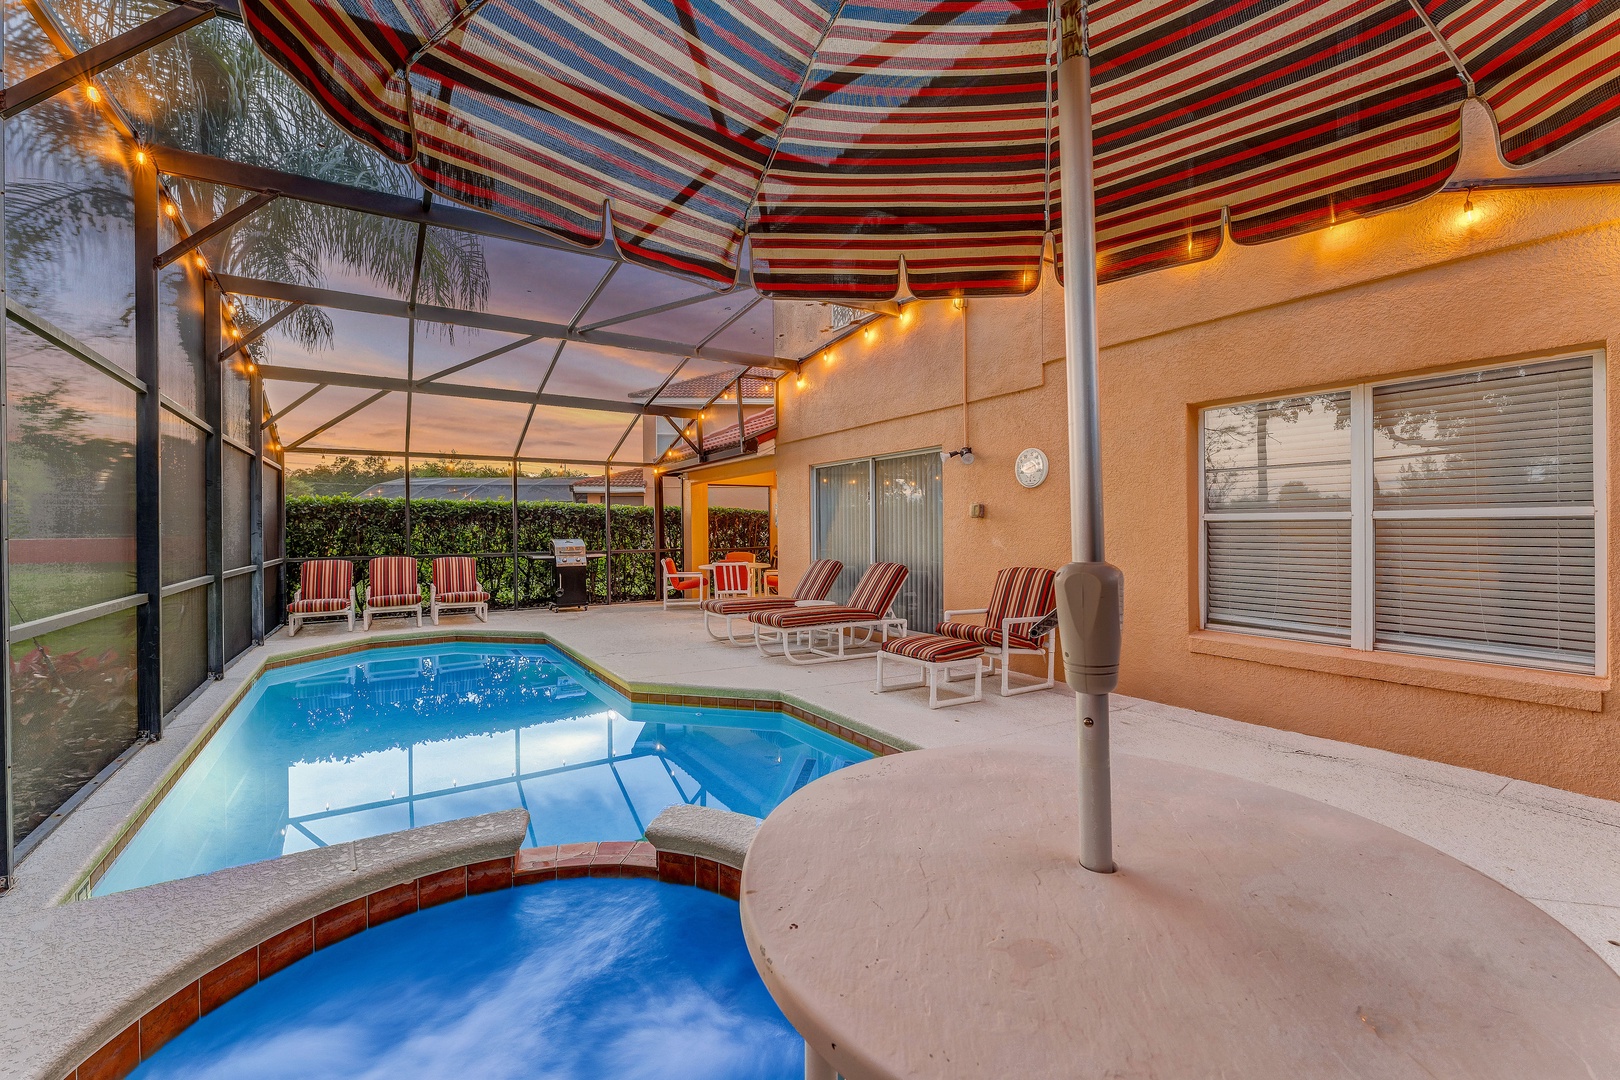 Private covered pool and hot tub with our seating